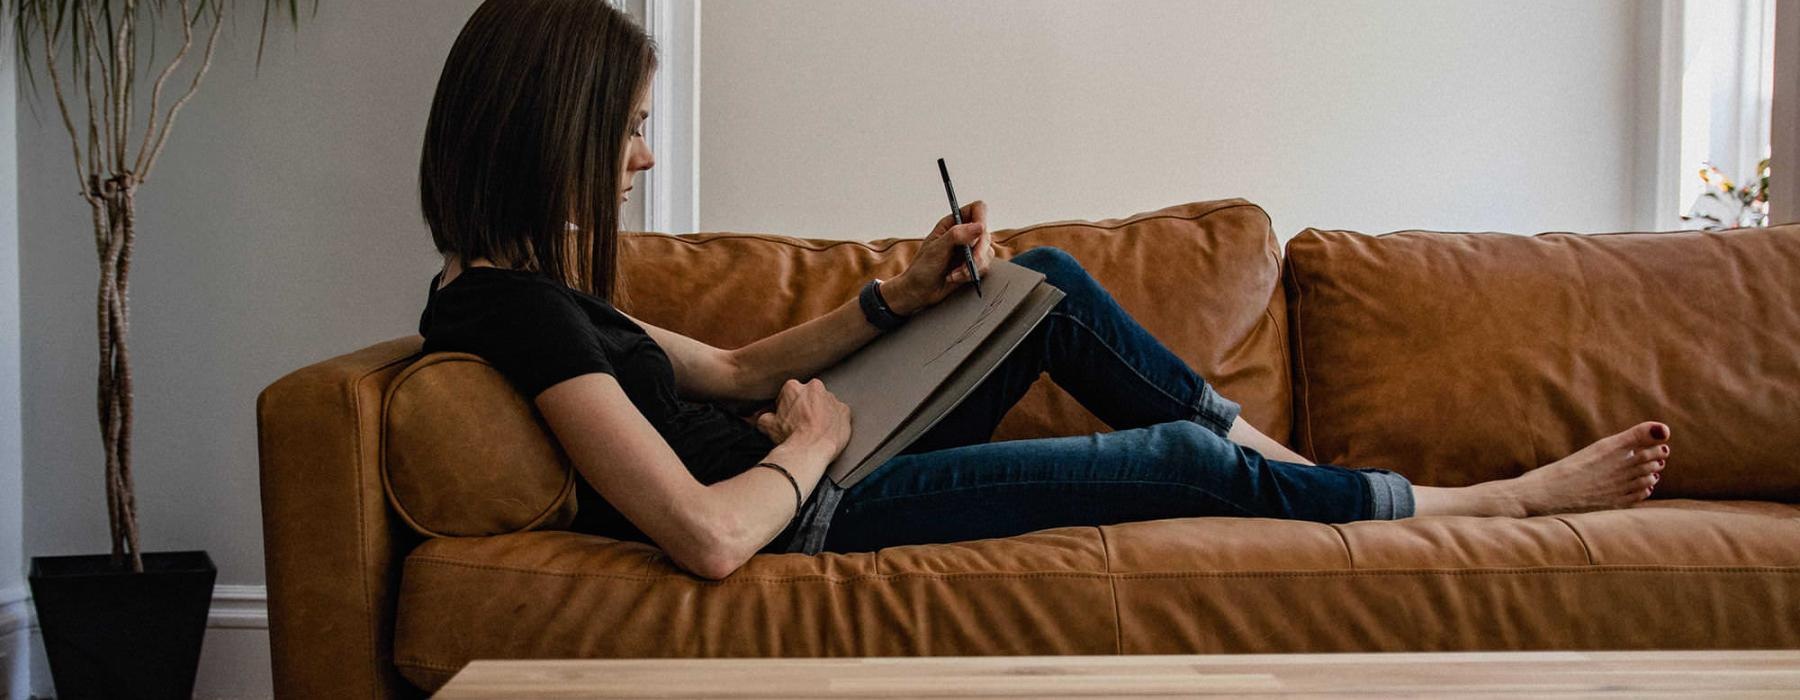 woman lies on a couch and draws on a large sketch pad